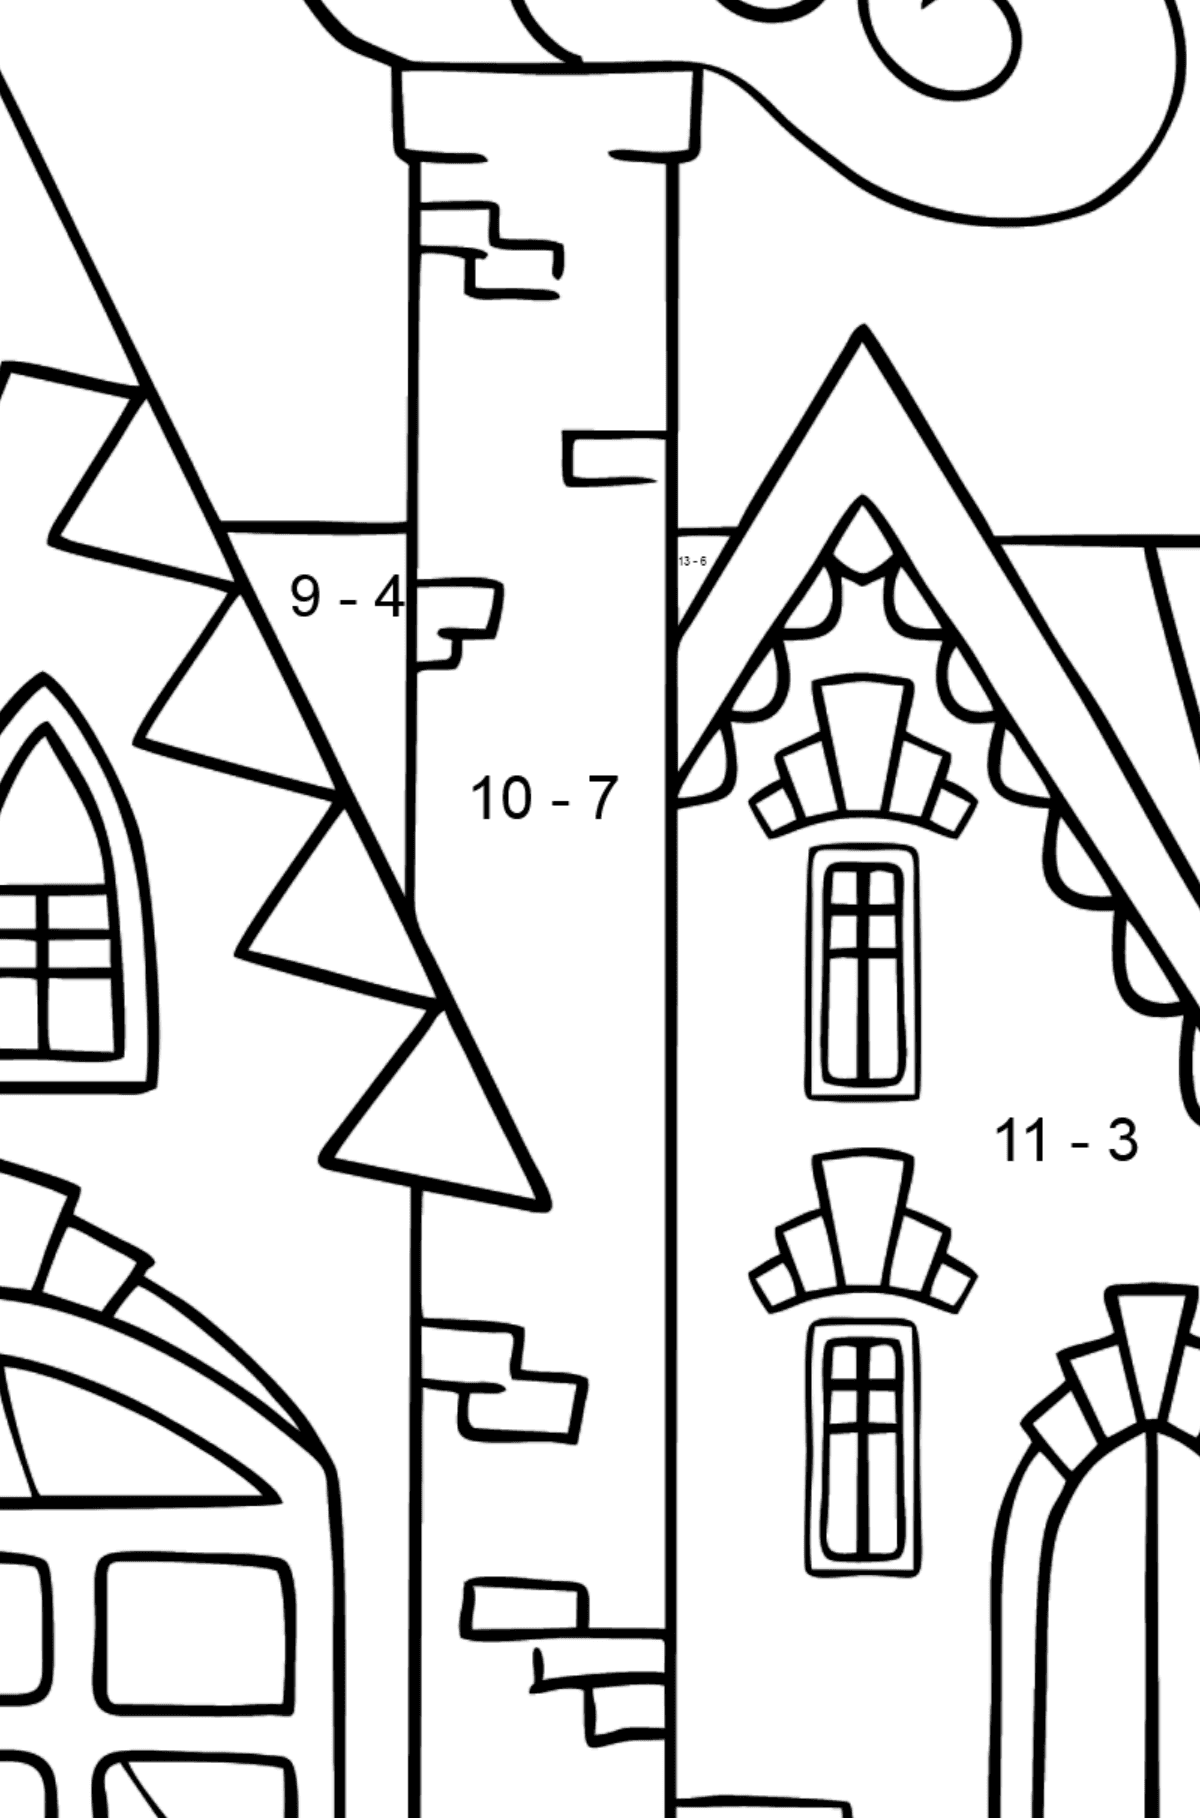 Simple Coloring Page - A Charming House - Math Coloring - Subtraction for Kids